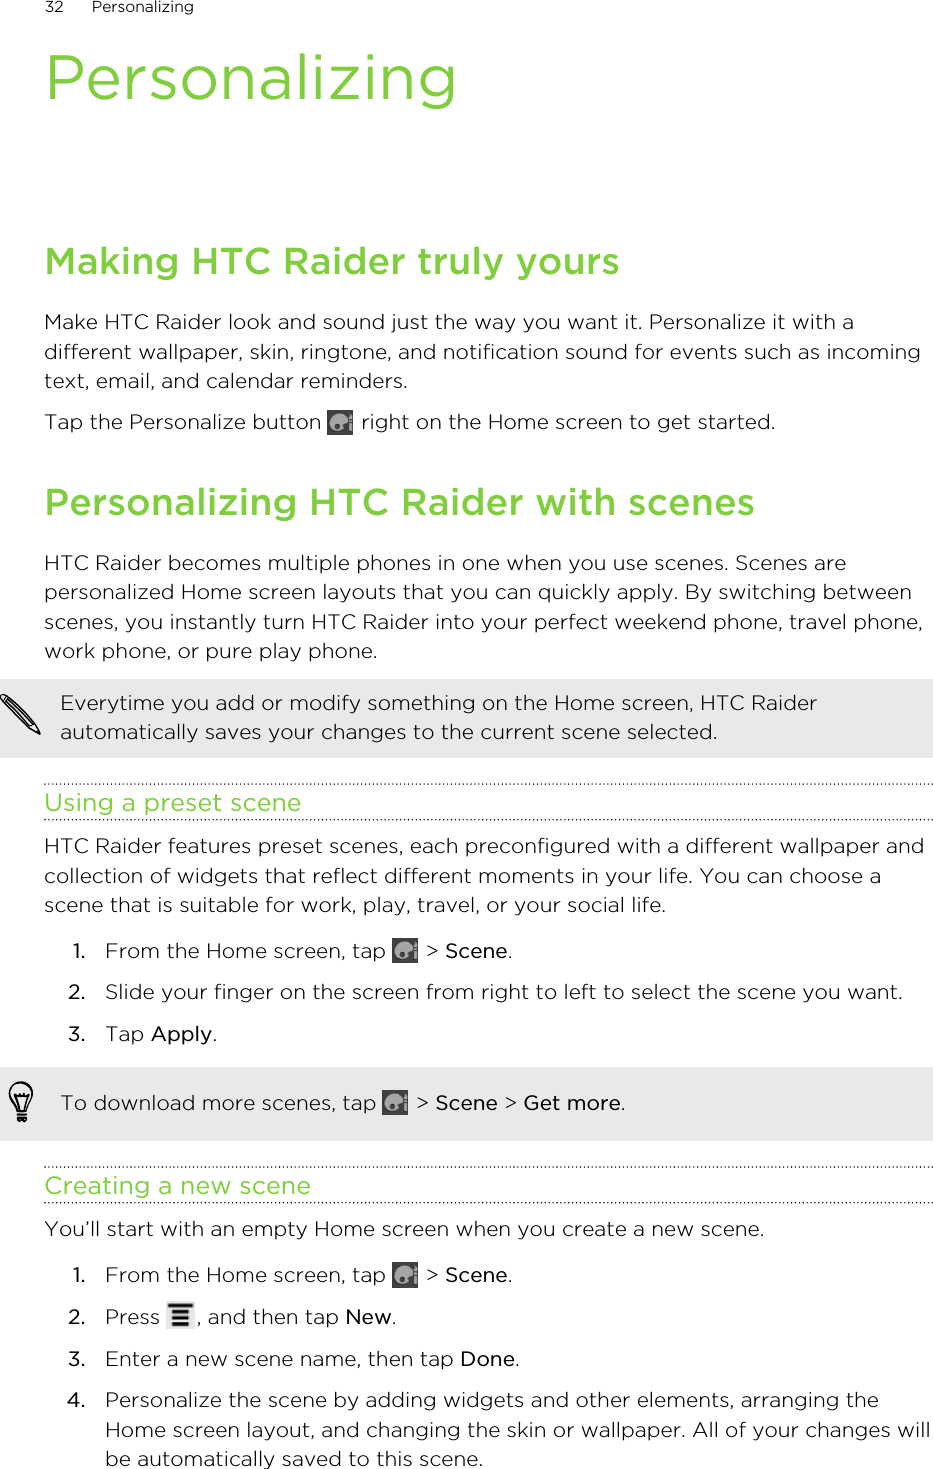 PersonalizingMaking HTC Raider truly yoursMake HTC Raider look and sound just the way you want it. Personalize it with adifferent wallpaper, skin, ringtone, and notification sound for events such as incomingtext, email, and calendar reminders.Tap the Personalize button   right on the Home screen to get started.Personalizing HTC Raider with scenesHTC Raider becomes multiple phones in one when you use scenes. Scenes arepersonalized Home screen layouts that you can quickly apply. By switching betweenscenes, you instantly turn HTC Raider into your perfect weekend phone, travel phone,work phone, or pure play phone.Everytime you add or modify something on the Home screen, HTC Raiderautomatically saves your changes to the current scene selected.Using a preset sceneHTC Raider features preset scenes, each preconfigured with a different wallpaper andcollection of widgets that reflect different moments in your life. You can choose ascene that is suitable for work, play, travel, or your social life.1. From the Home screen, tap   &gt; Scene.2. Slide your finger on the screen from right to left to select the scene you want.3. Tap Apply.To download more scenes, tap   &gt; Scene &gt; Get more.Creating a new sceneYou’ll start with an empty Home screen when you create a new scene.1. From the Home screen, tap   &gt; Scene.2. Press  , and then tap New.3. Enter a new scene name, then tap Done.4. Personalize the scene by adding widgets and other elements, arranging theHome screen layout, and changing the skin or wallpaper. All of your changes willbe automatically saved to this scene.32 Personalizing